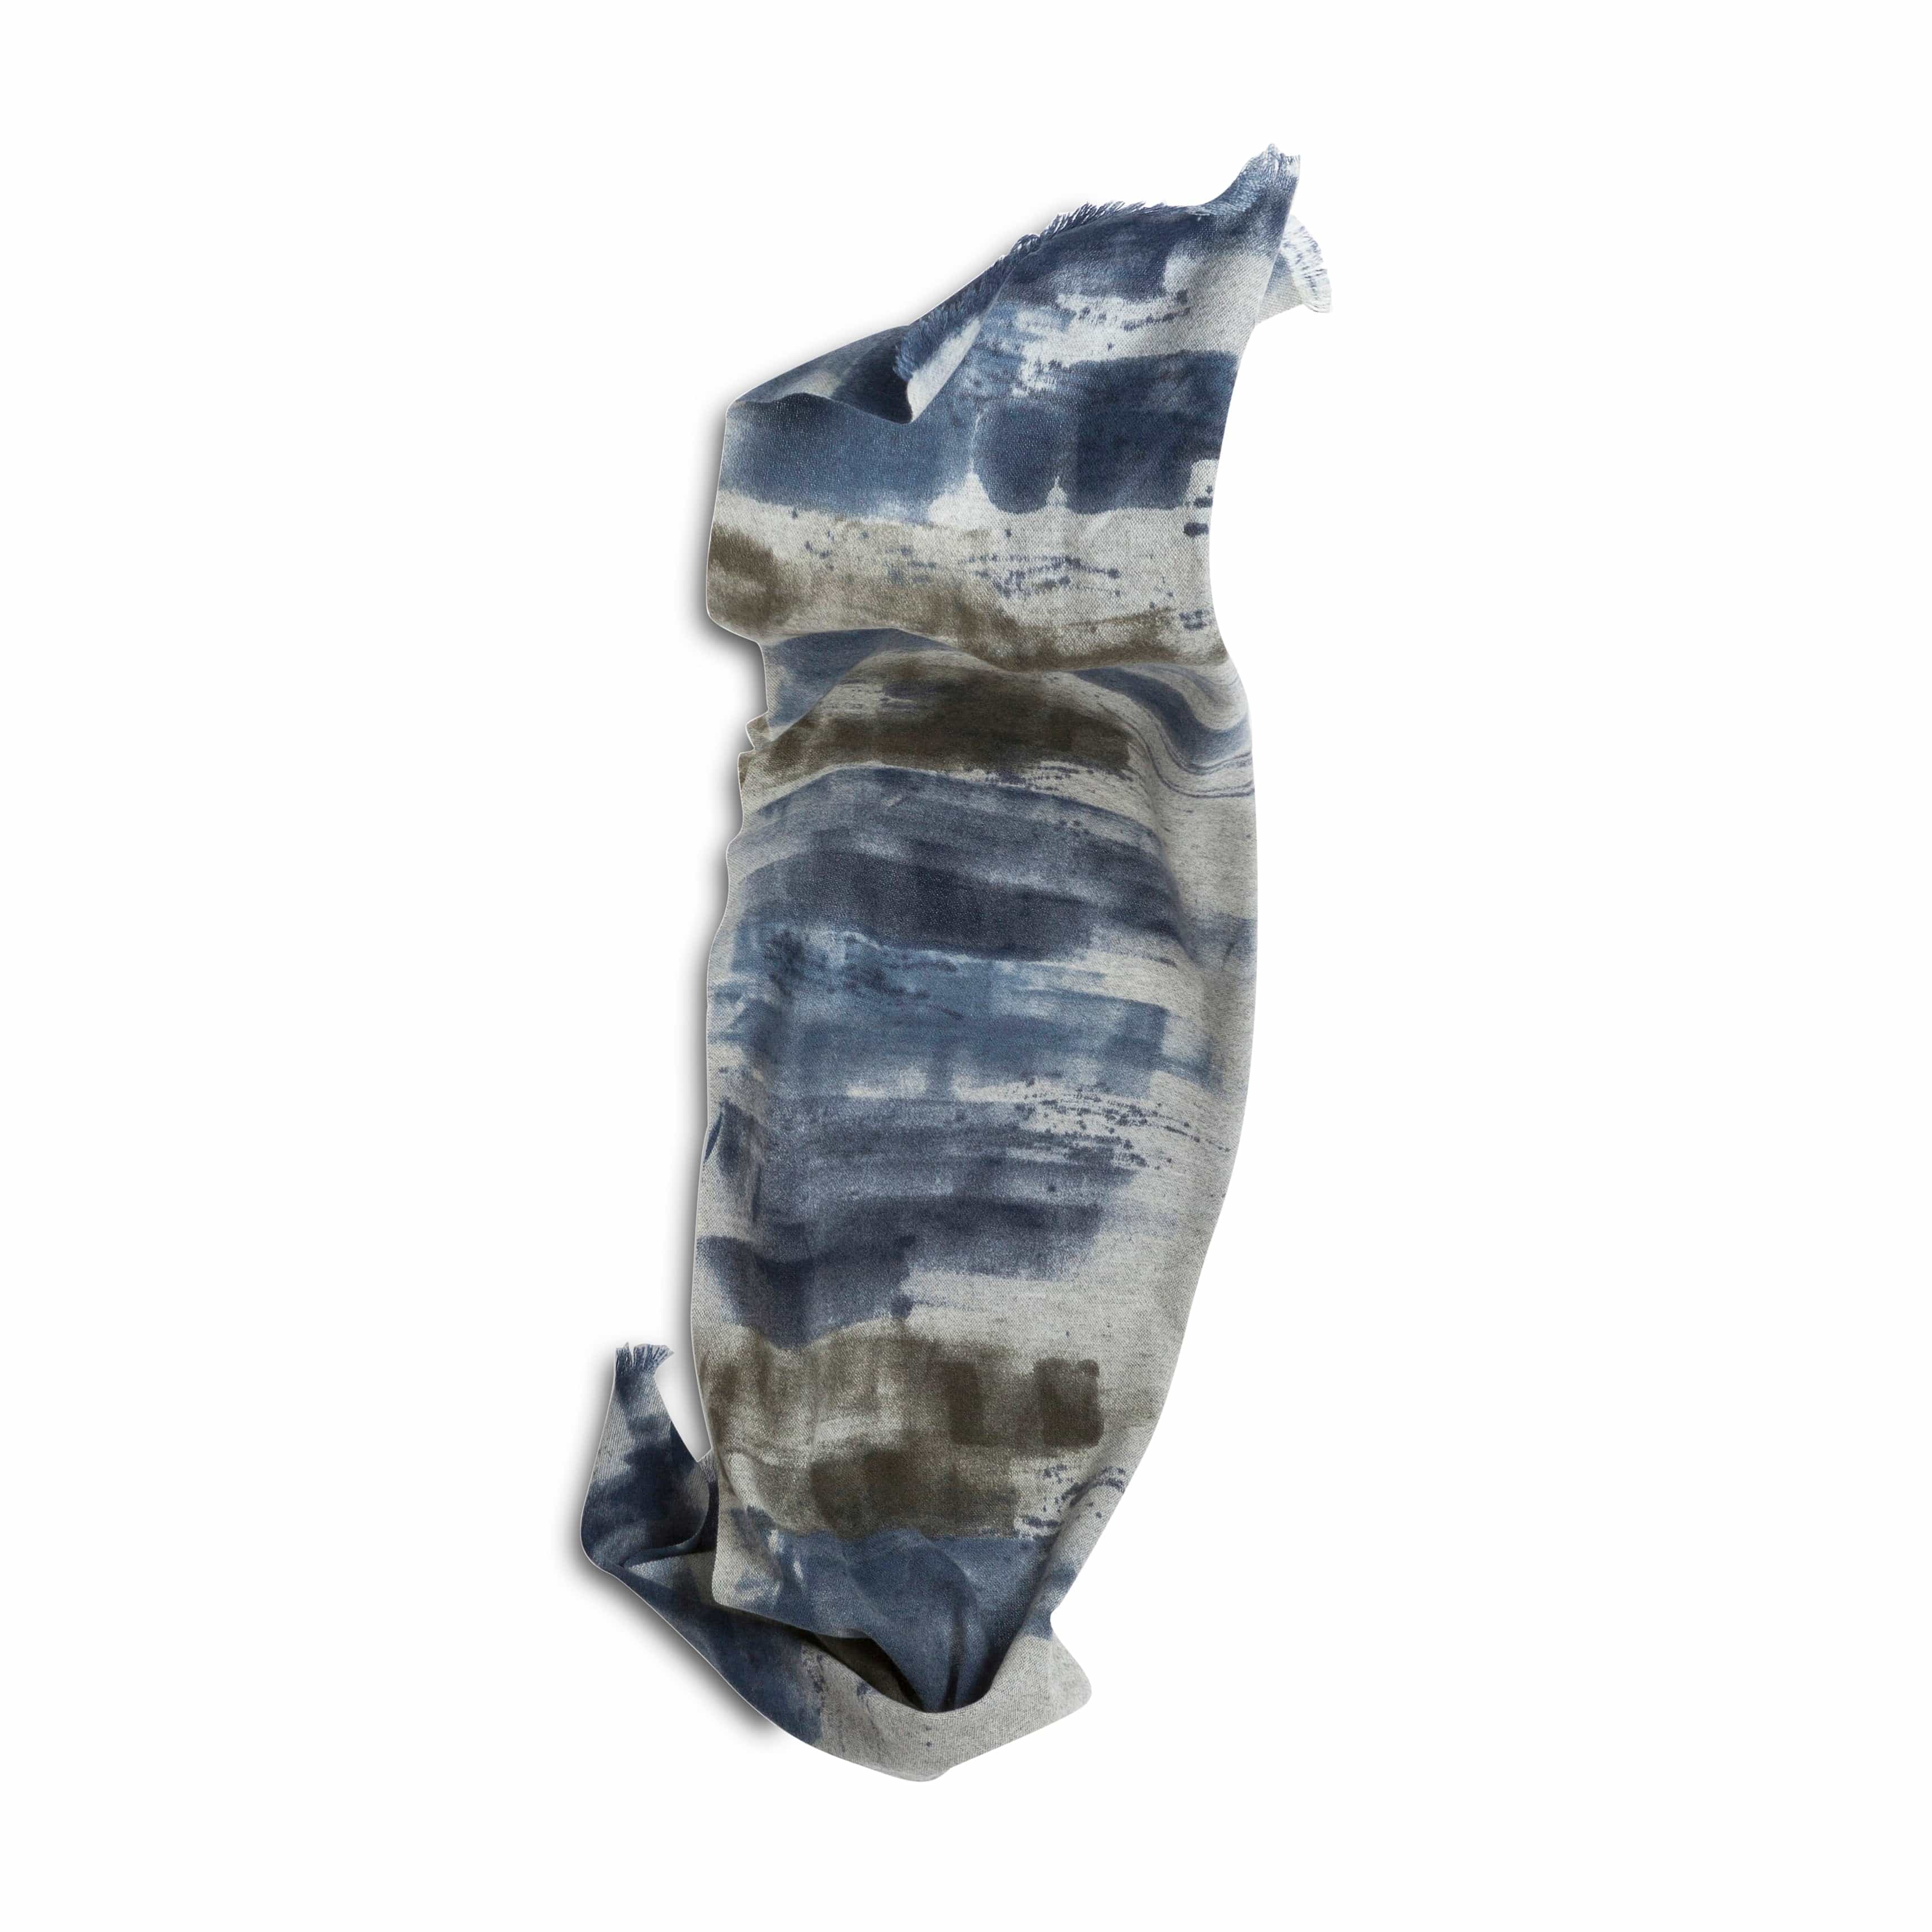 Marco Cashmere Scarf – Handpainted - Grey & Blue - Made in Italy